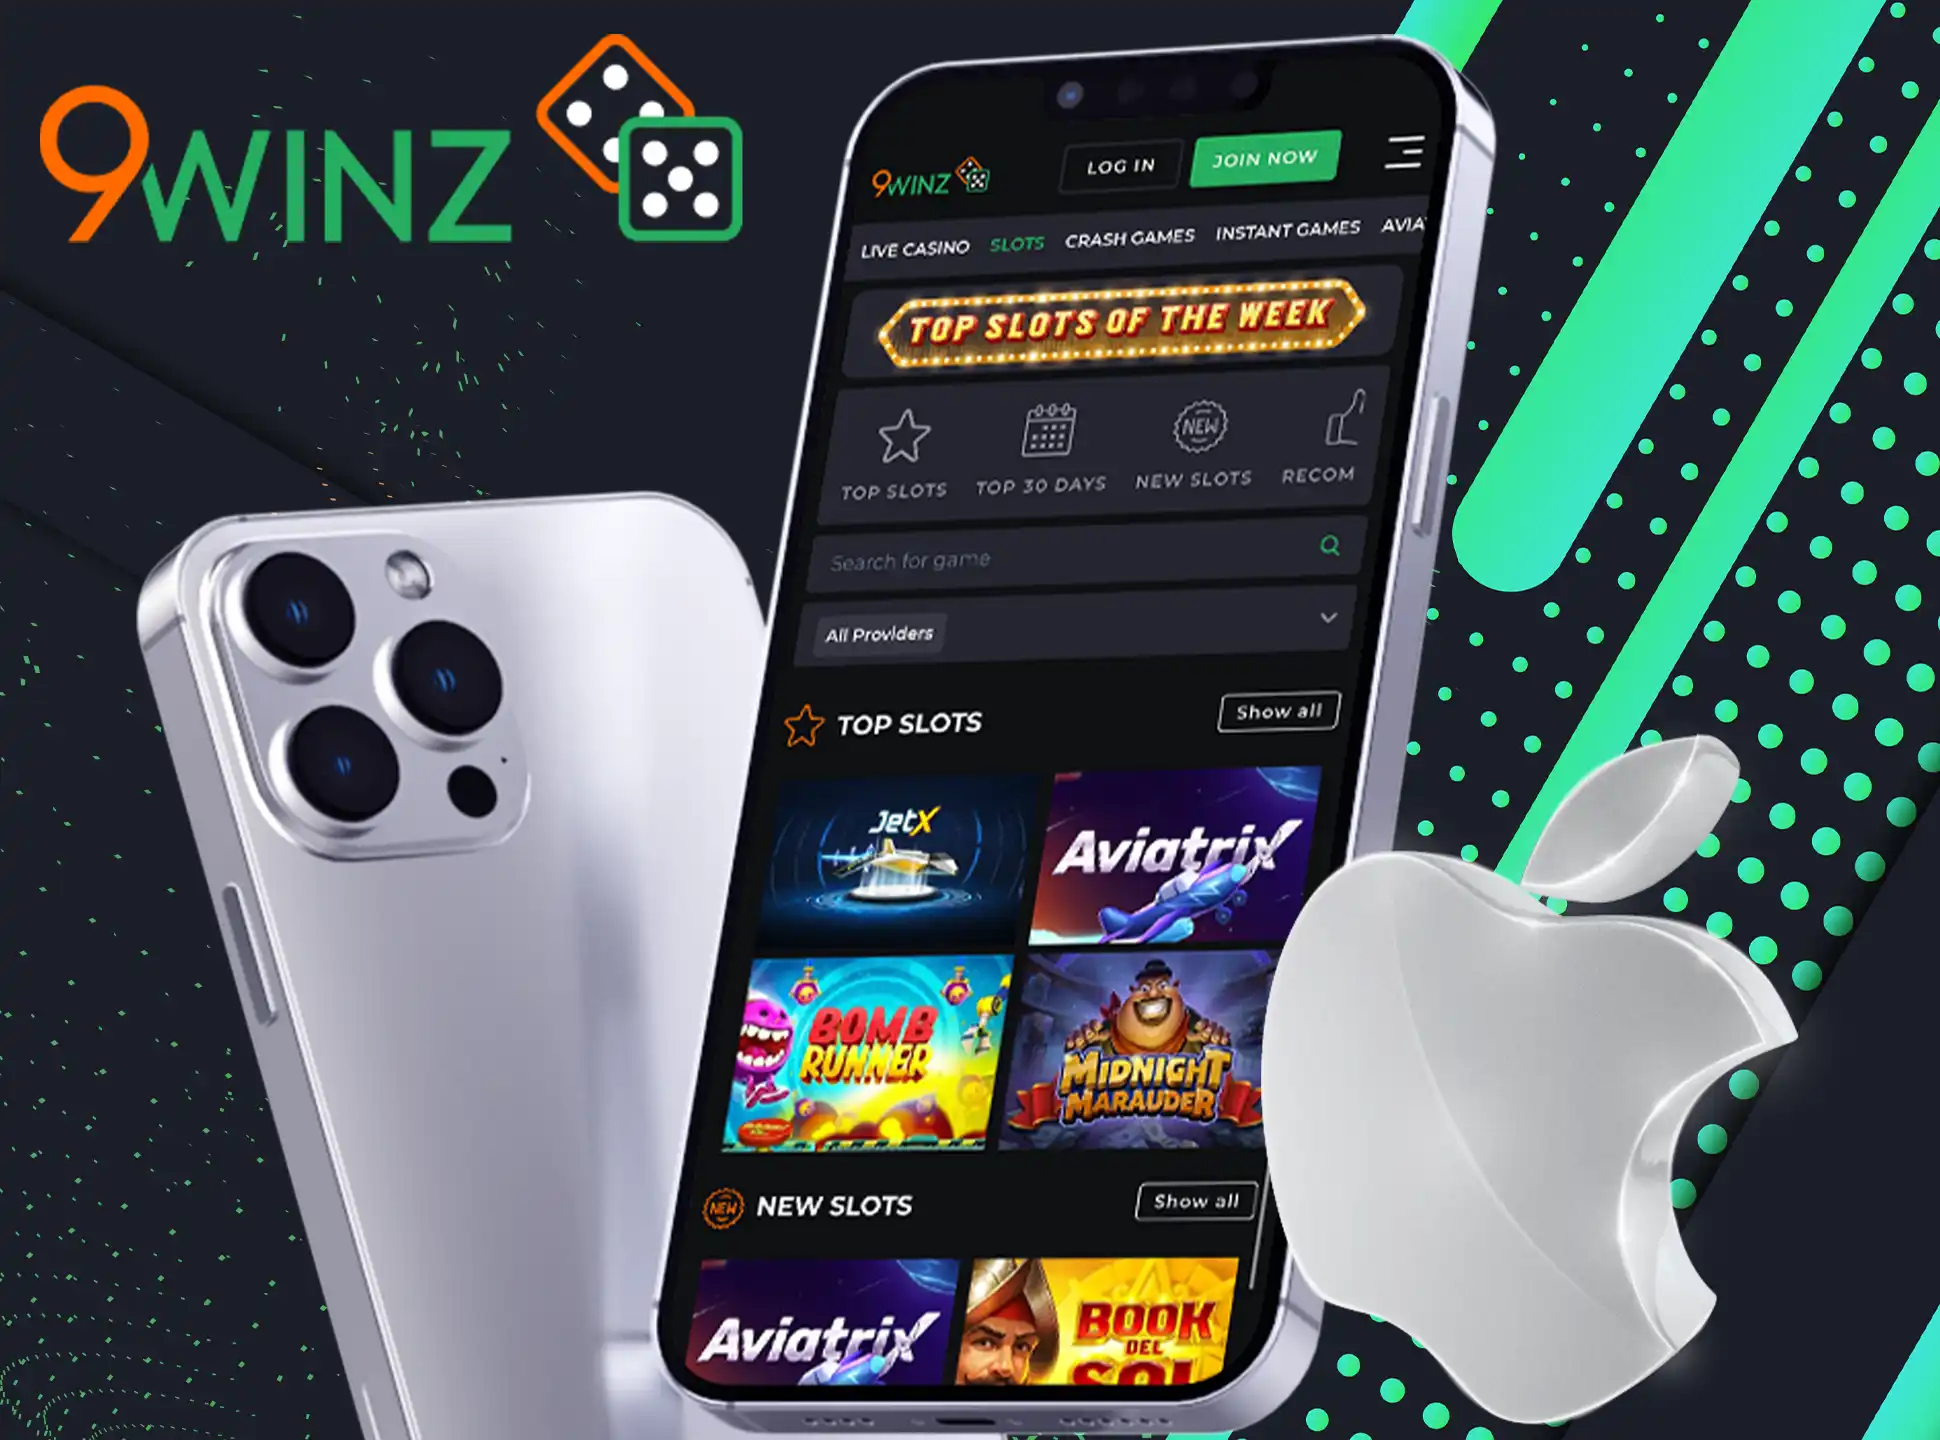 For iOS players the 9winz mobile site is available in the browser.